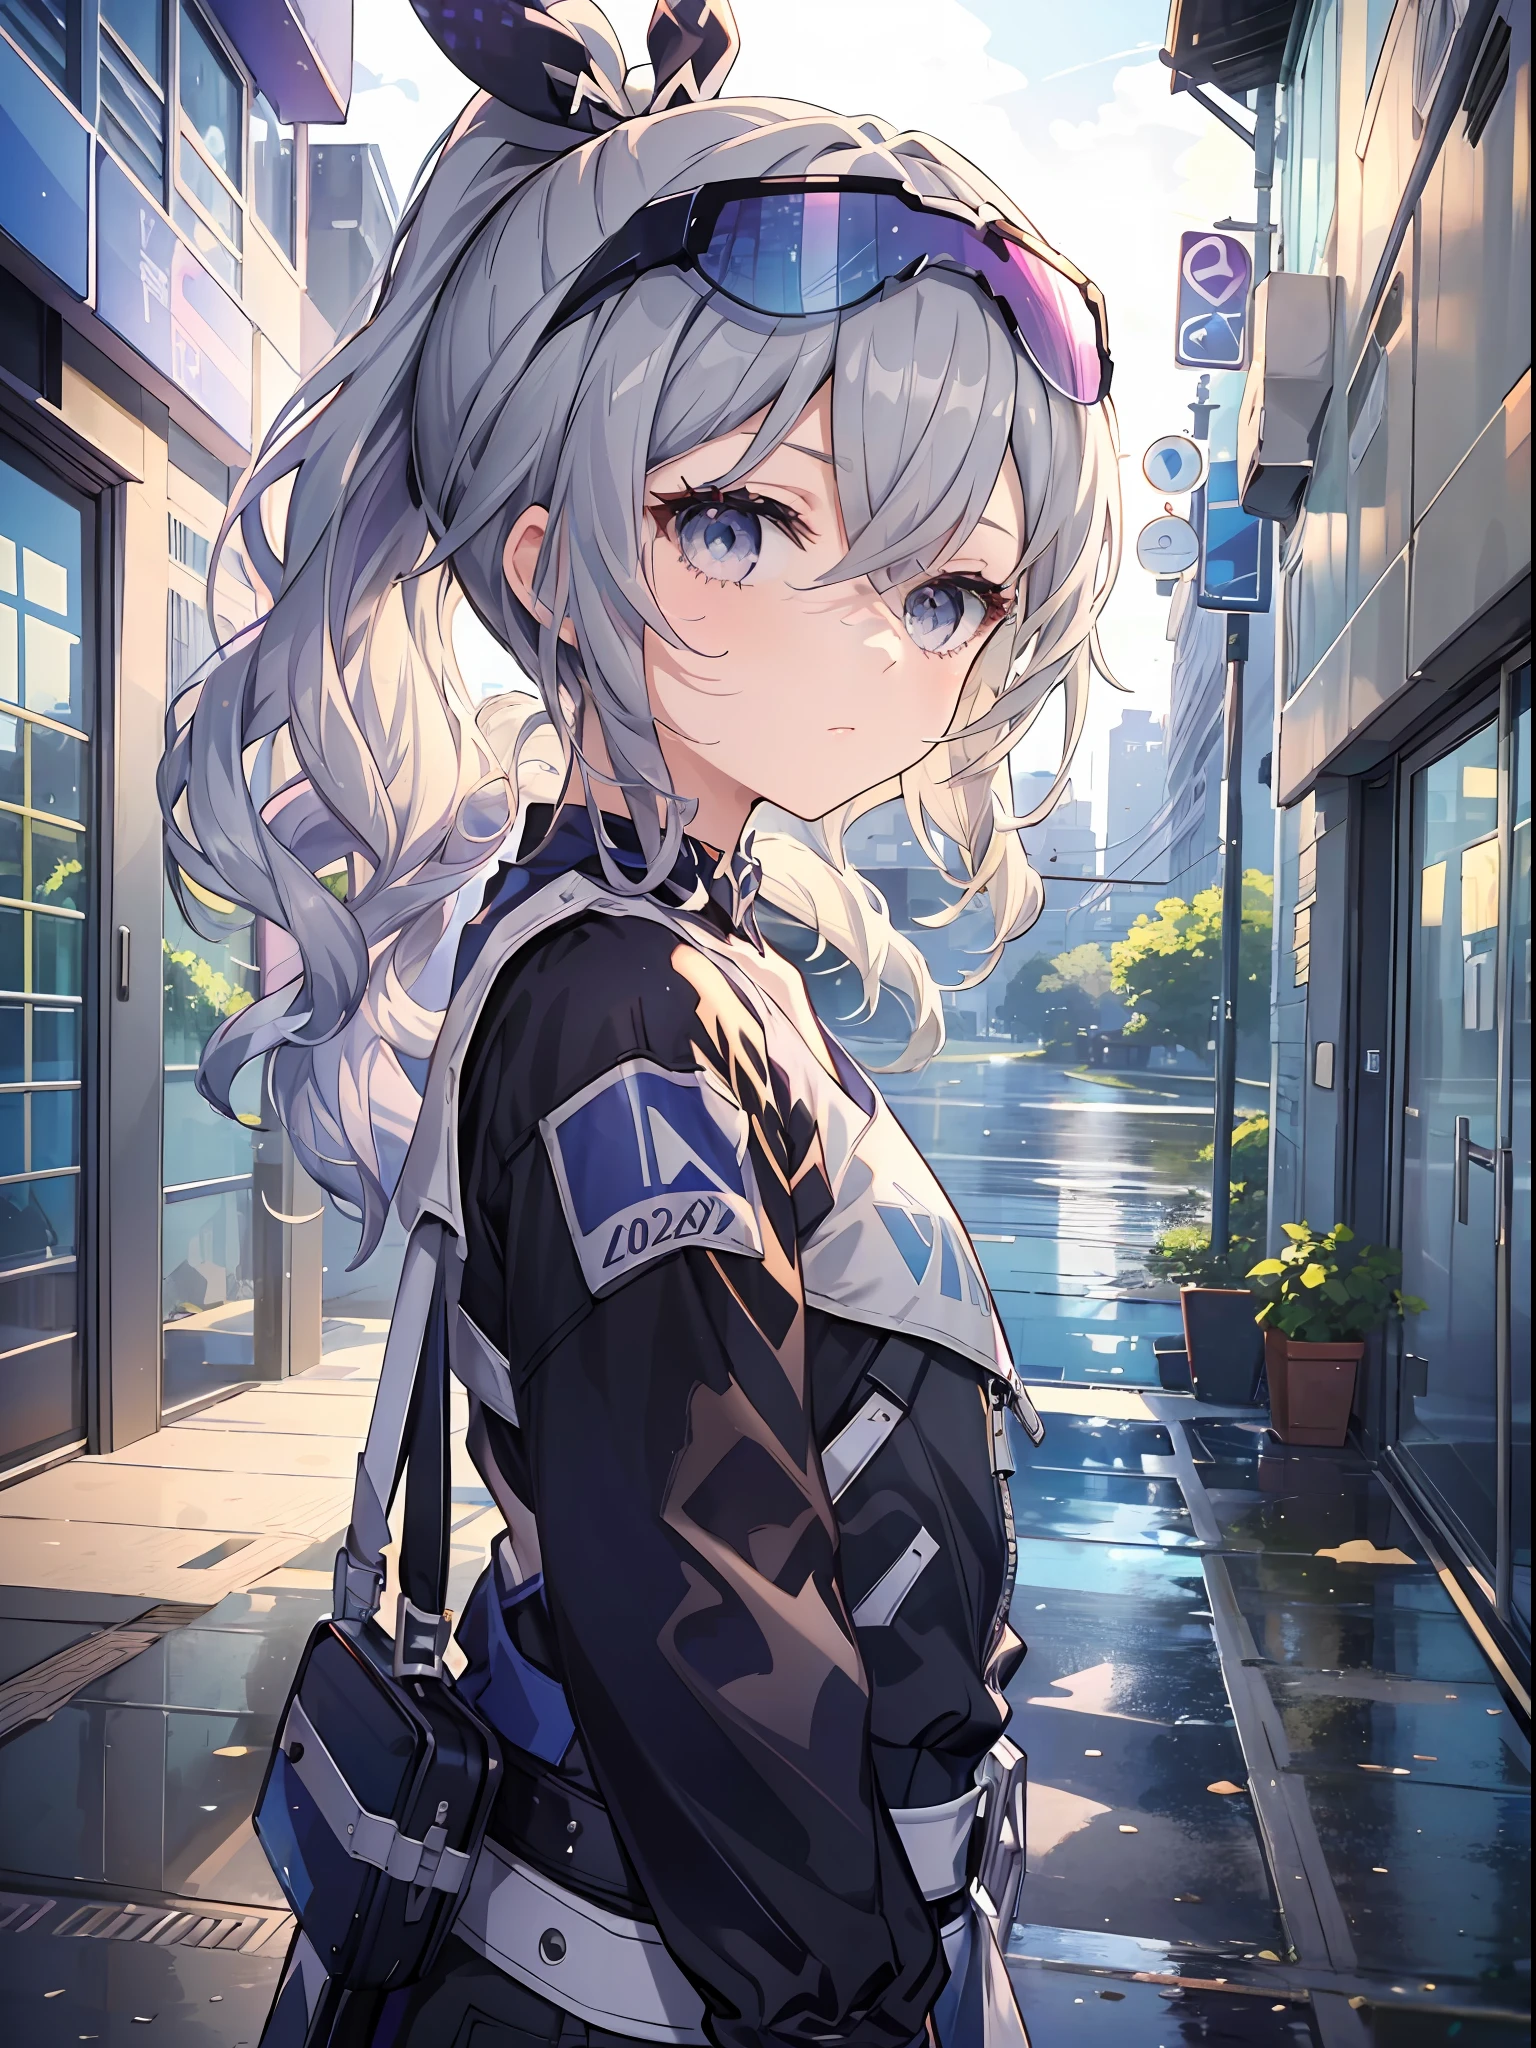 Exquisite masterpiece, best quality, illustration style, an anime girl with a curly ponytail, beautiful eyes, summer, sports outfit, blue-purple gradient goggles, small, heartwarming, youthful and beautiful, heroic and sassy, black and white matching, gray hair, showing a natural casual style. The dynamic posture contains the golden section, large aperture portrait, white space, strong contrast between light and shadow, super texture, super clear and concise picture, presenting extremely beautiful, elegant temperament, delicate facial expressions, urban background